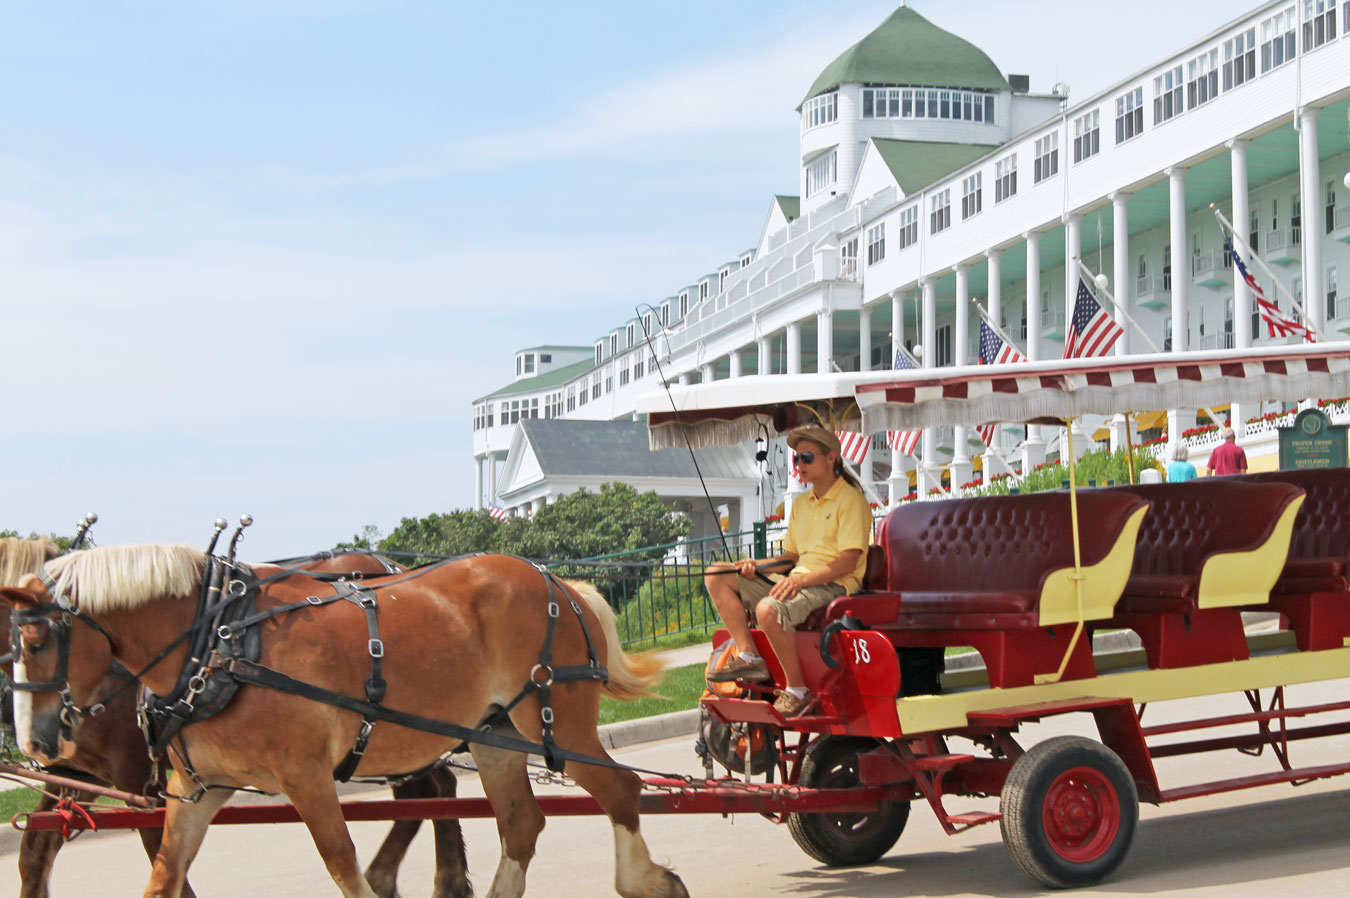 5 Reasons A Mackinac Island Carriage Tour Will Make Your Day (via Wading in Big Shoes)